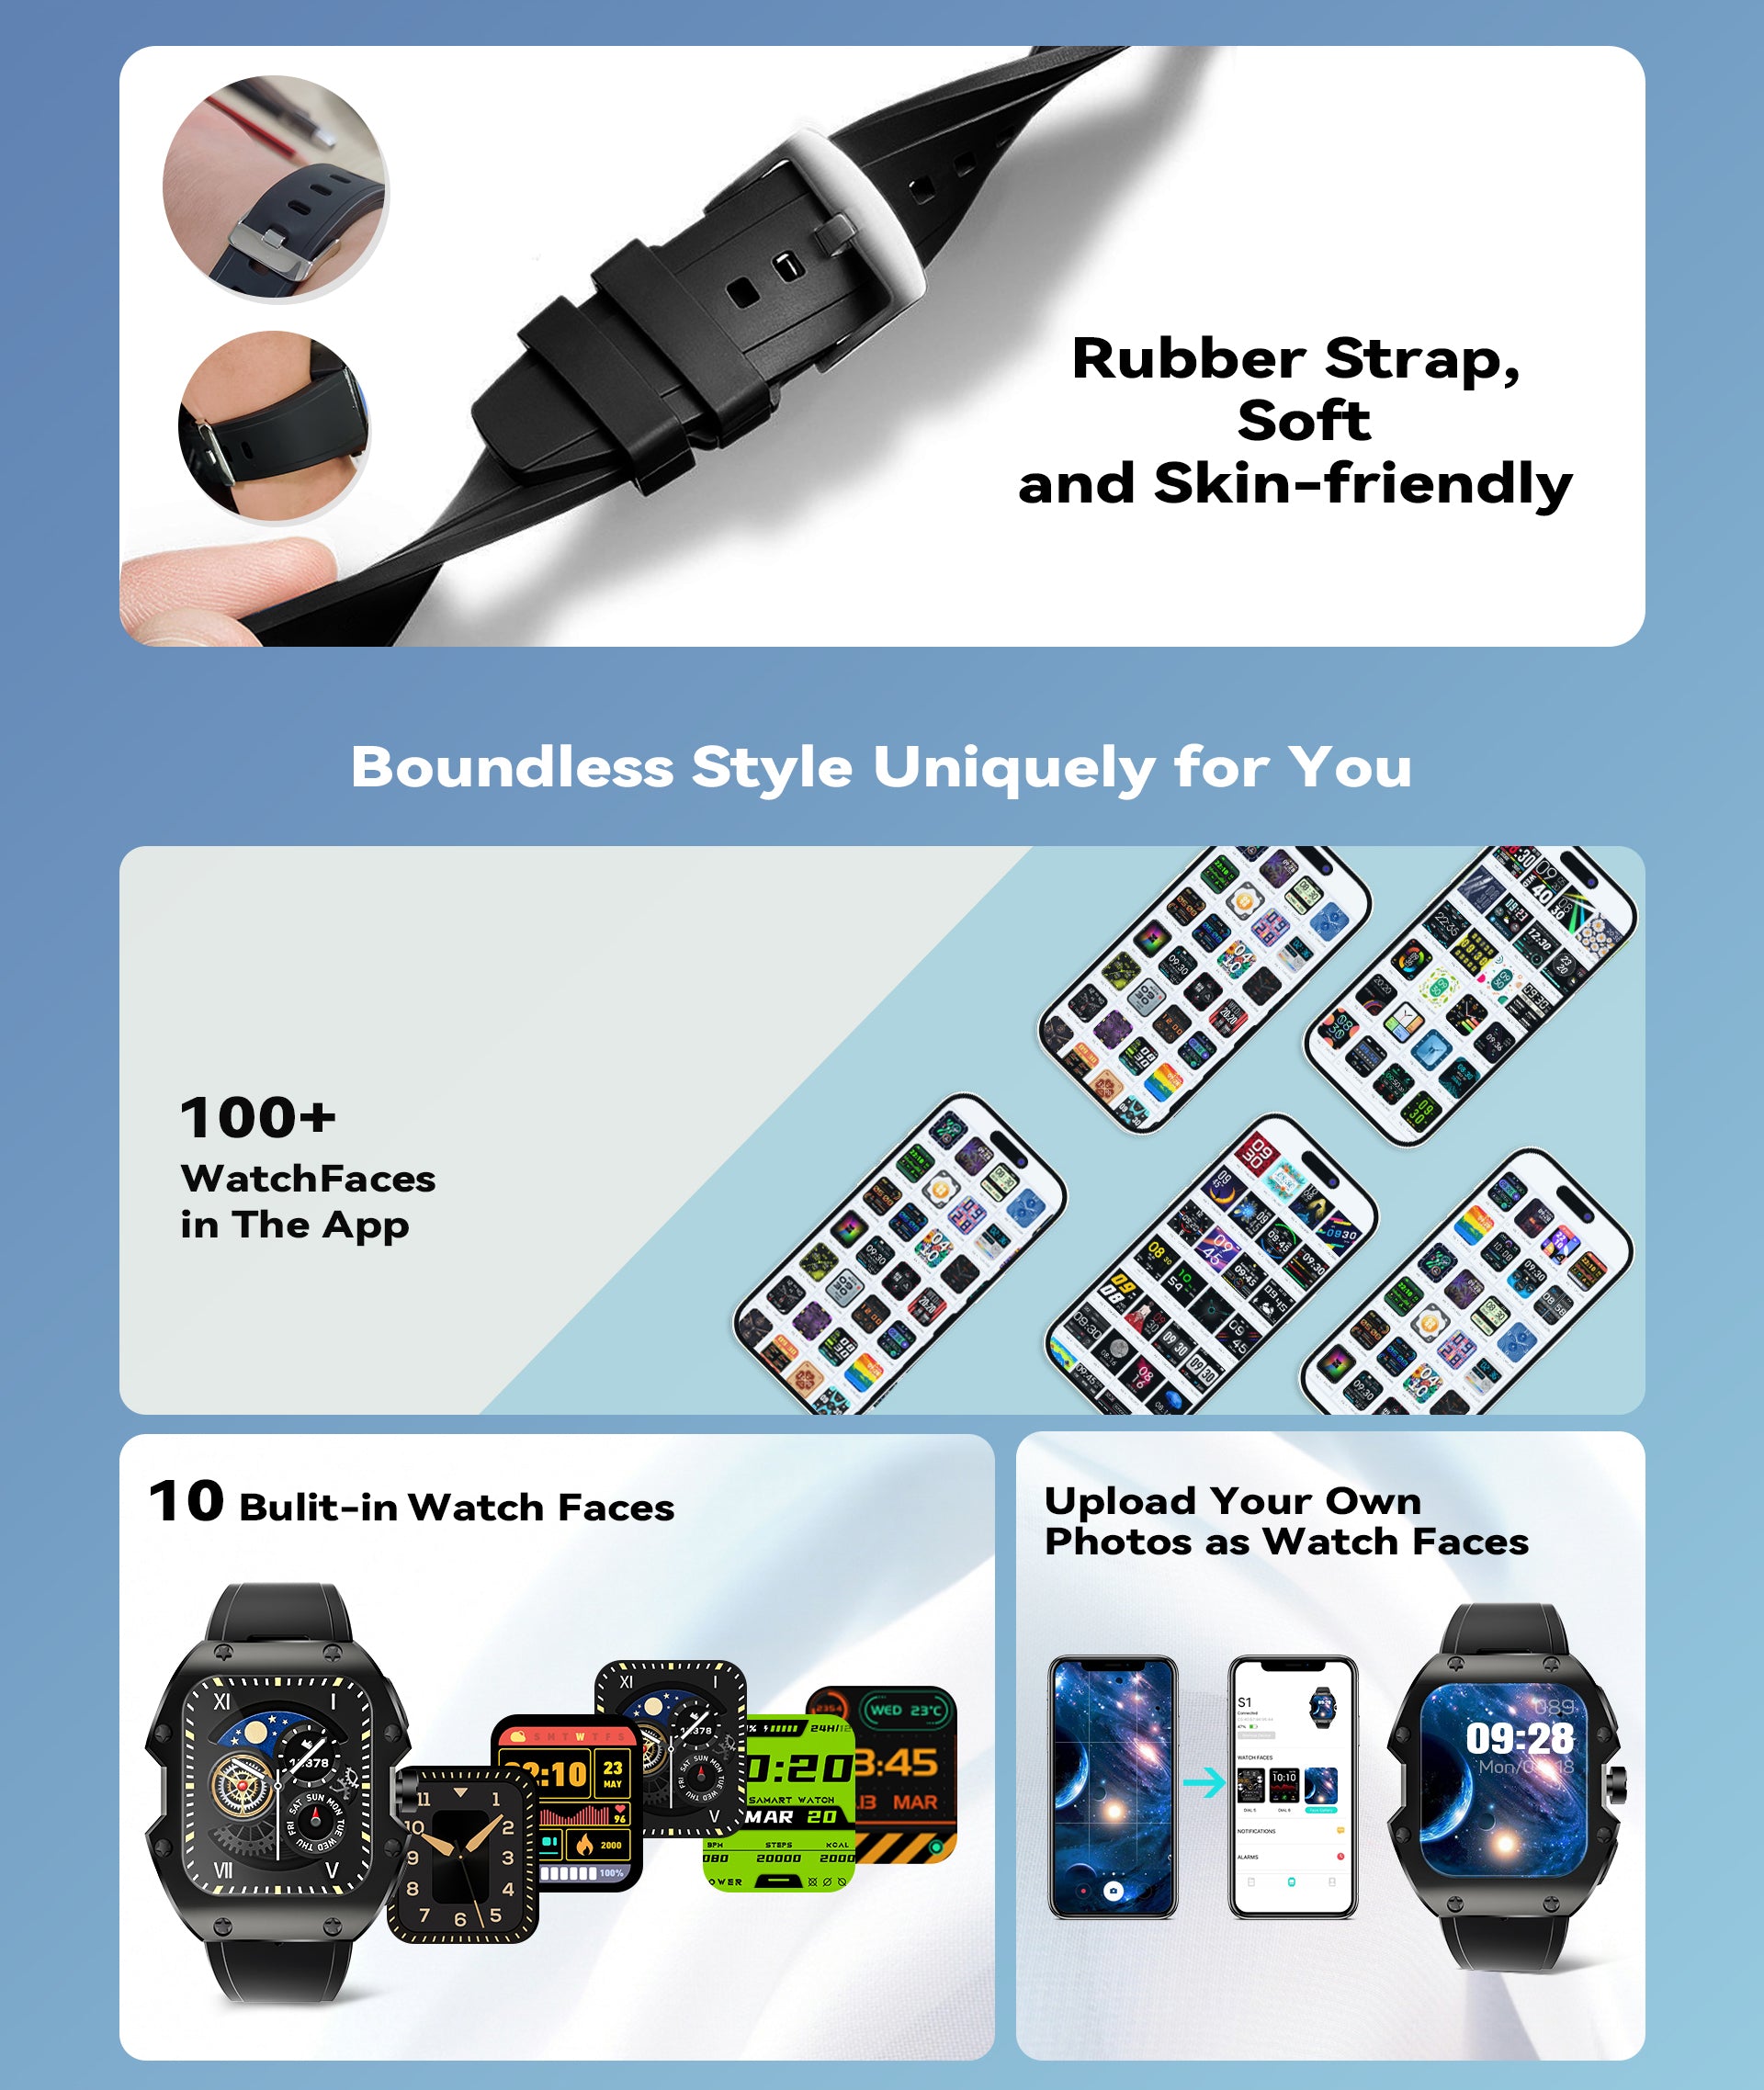 rugged smart watches for men waterproof